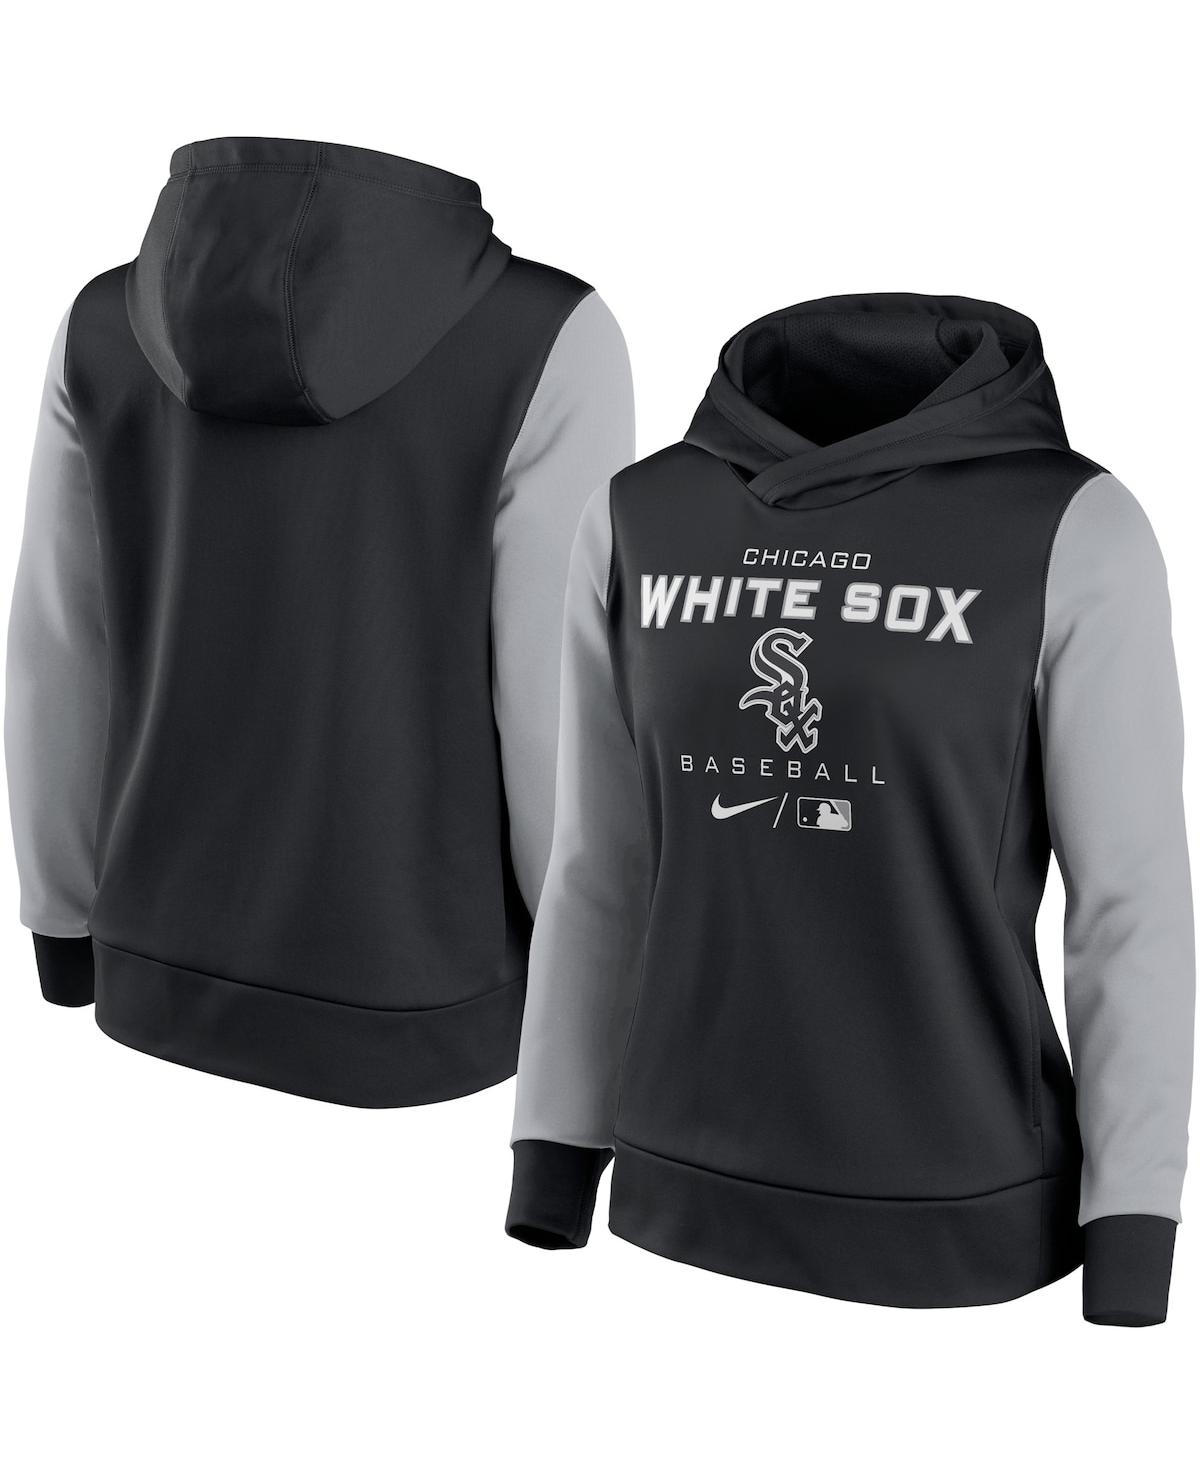 Nike Women's  Black And Gray Chicago White Sox Authentic Collection Pullover Hoodie In Black,gray